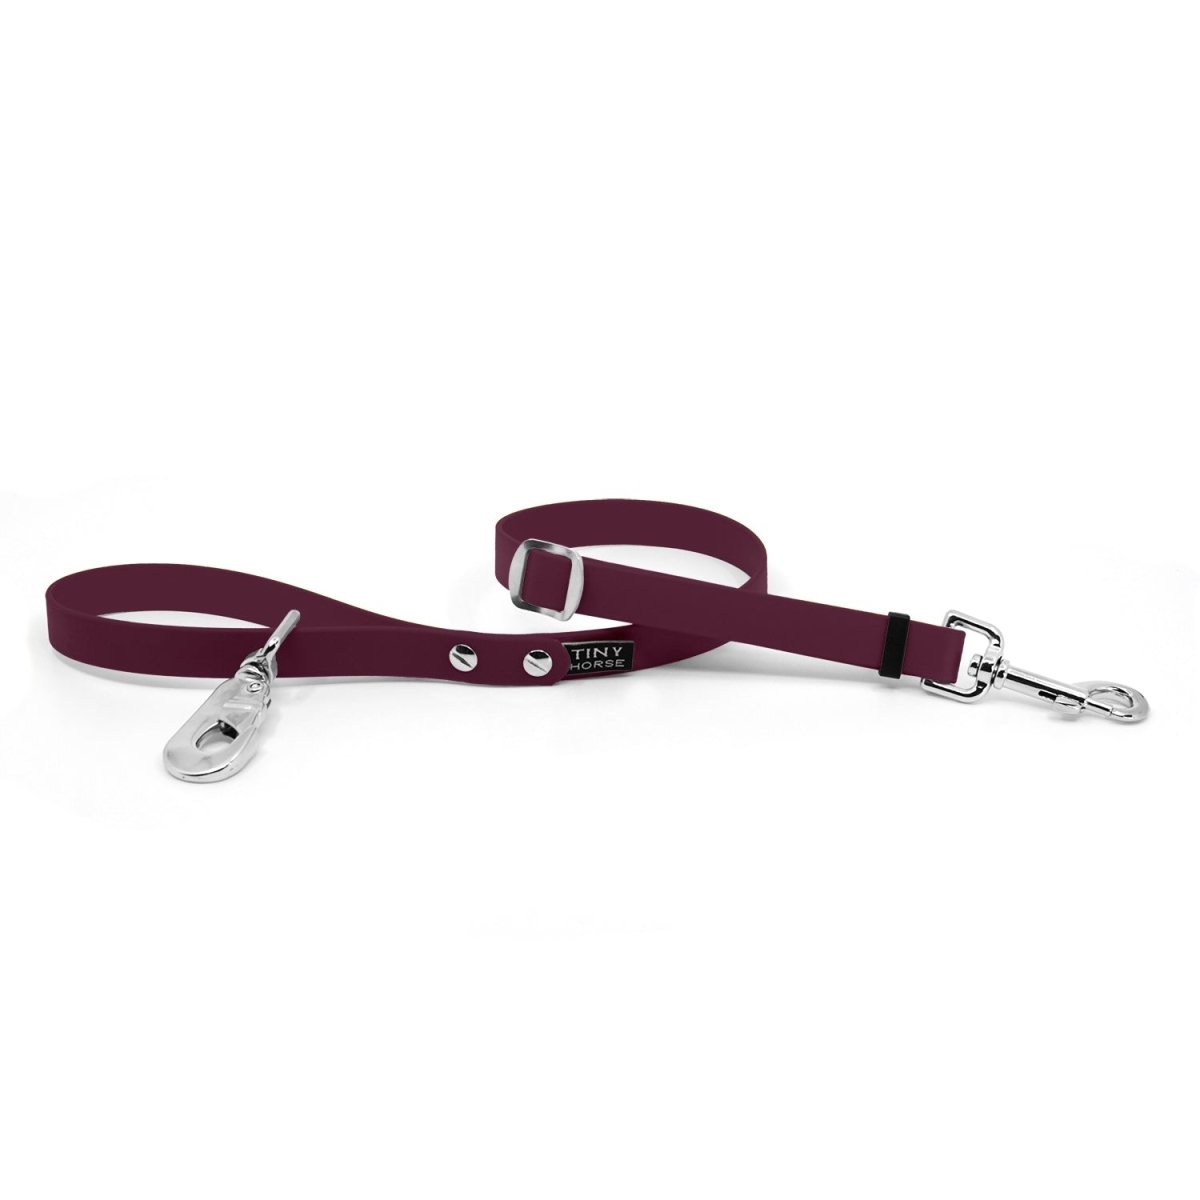 Lead-All Pro Leashes - TinyHorse Mercantile